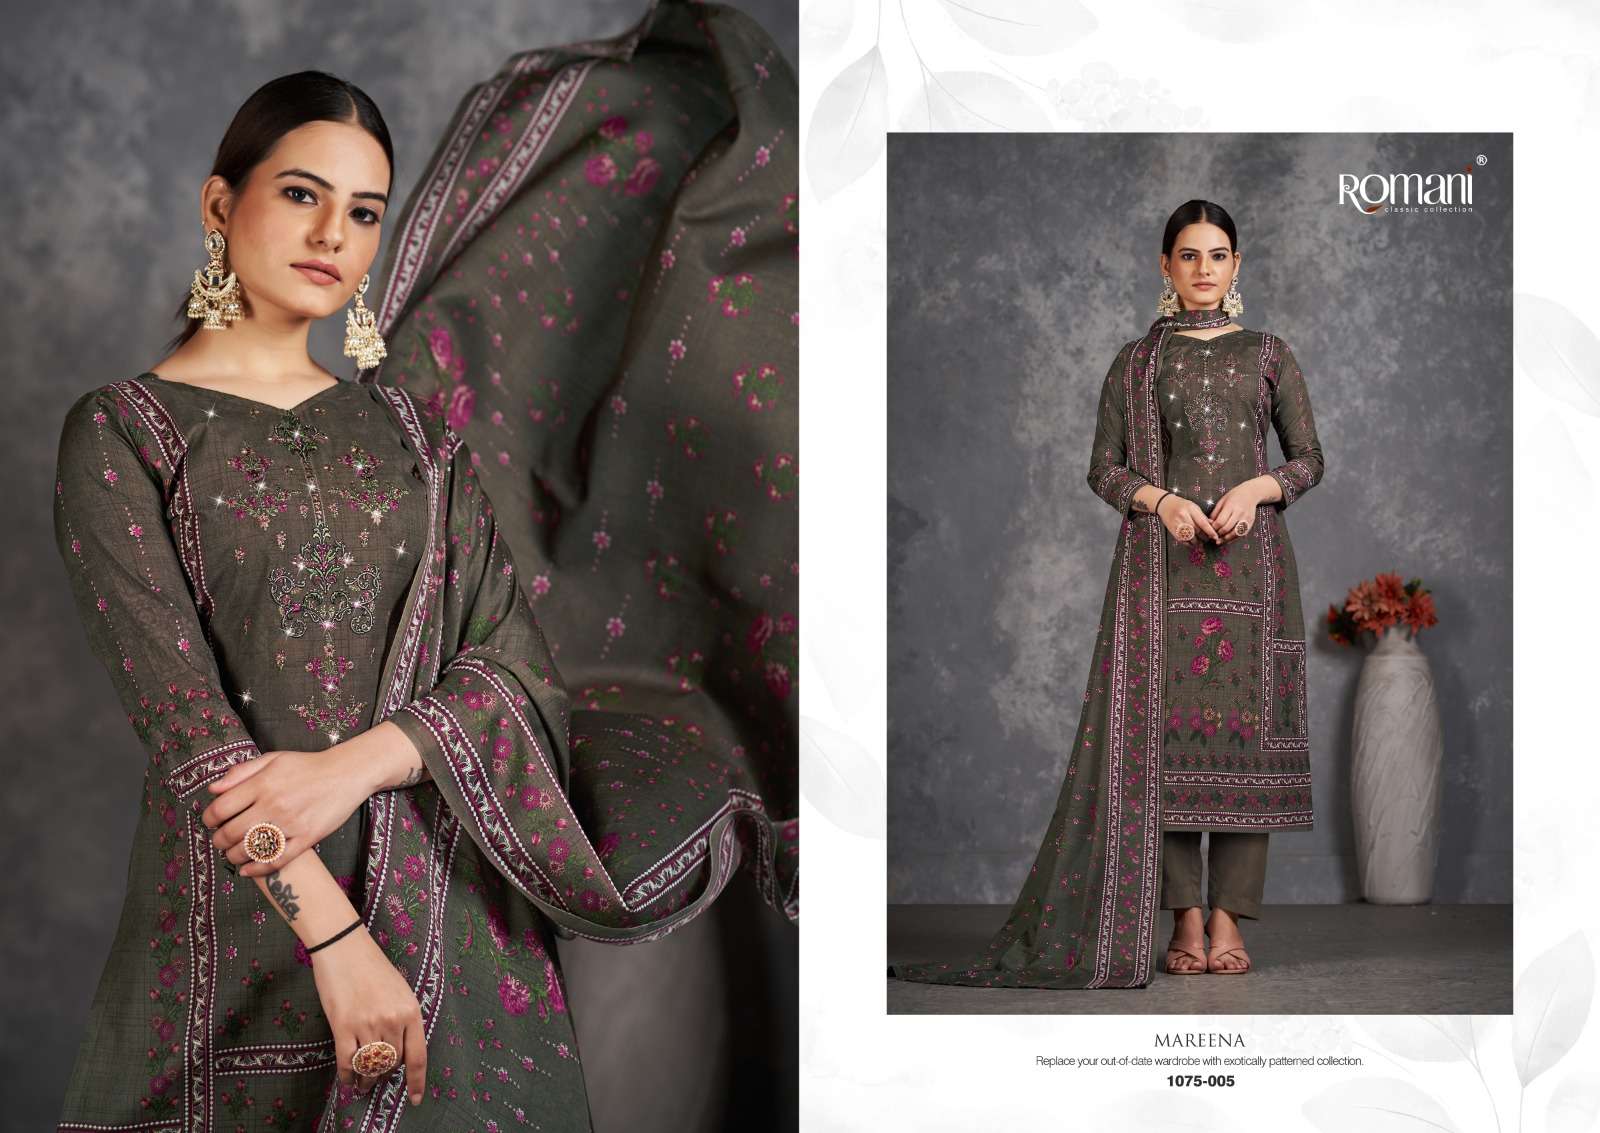 Mareena Vol-11 By Romani 1075-001 To 1075-010 Series Beautiful Stylish Festive Suits Fancy Colorful Casual Wear & Ethnic Wear & Ready To Wear Pure Soft Cotton With Embroidery Dresses At Wholesale Price